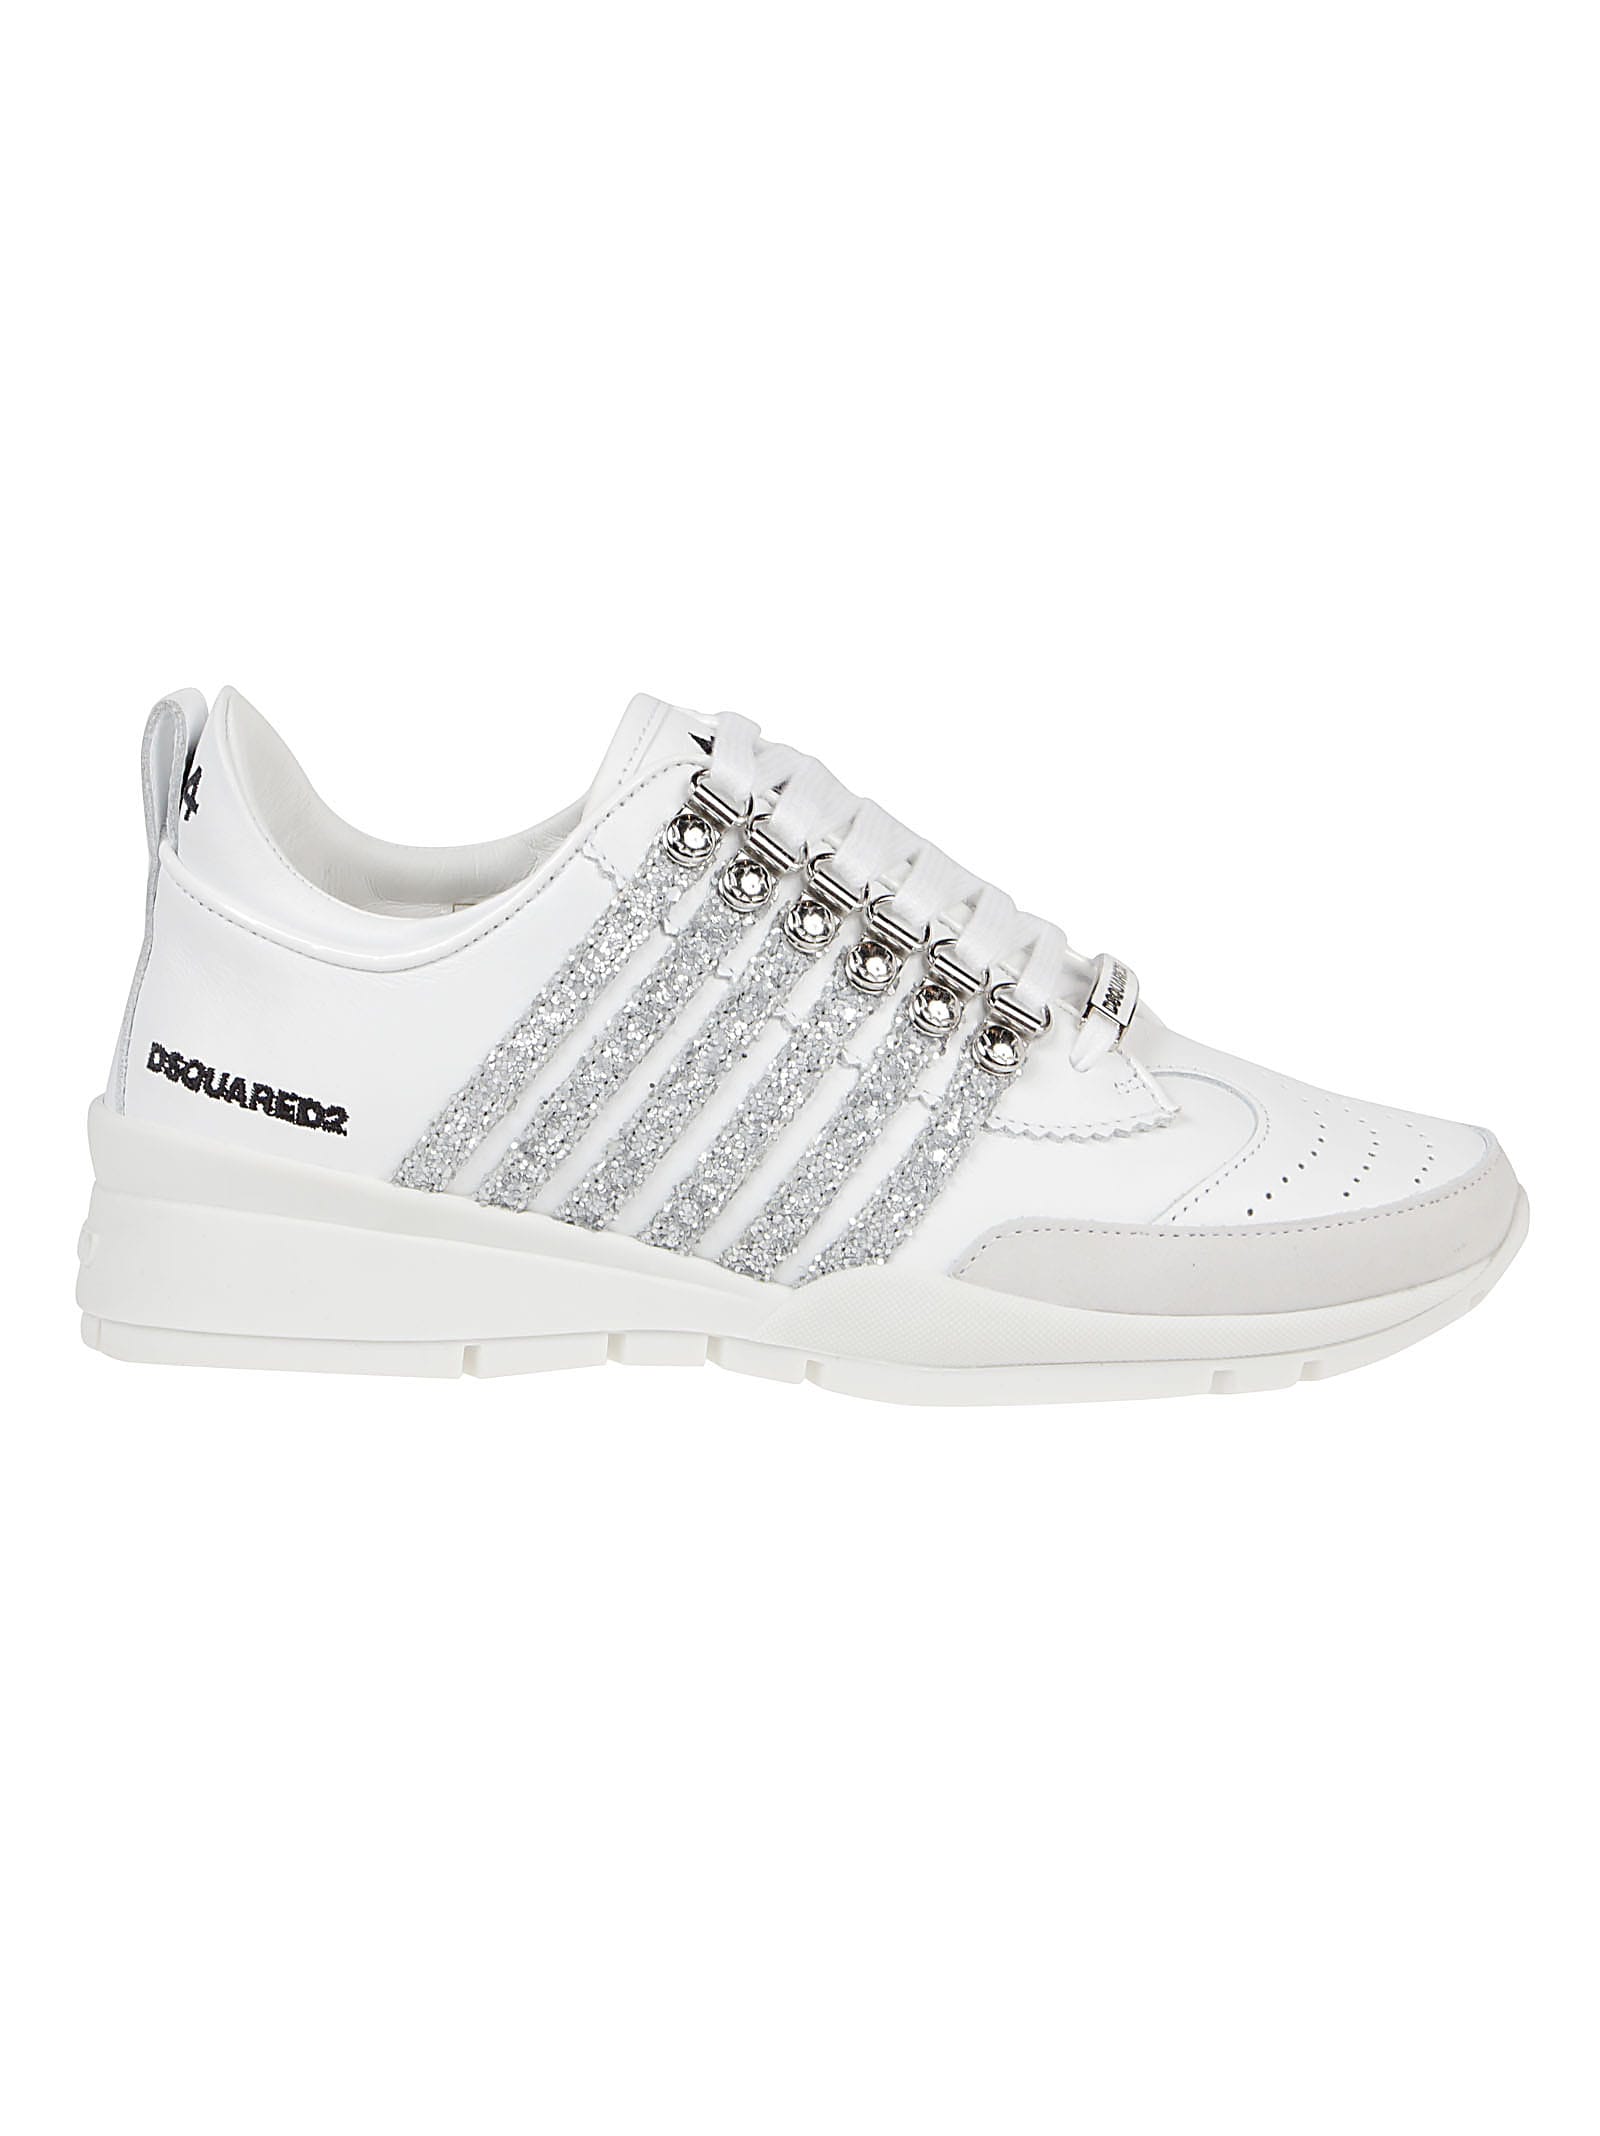 DSQUARED2 SNEAKERS,SNW0109 06501472 M241 BIANCO ARGENTO